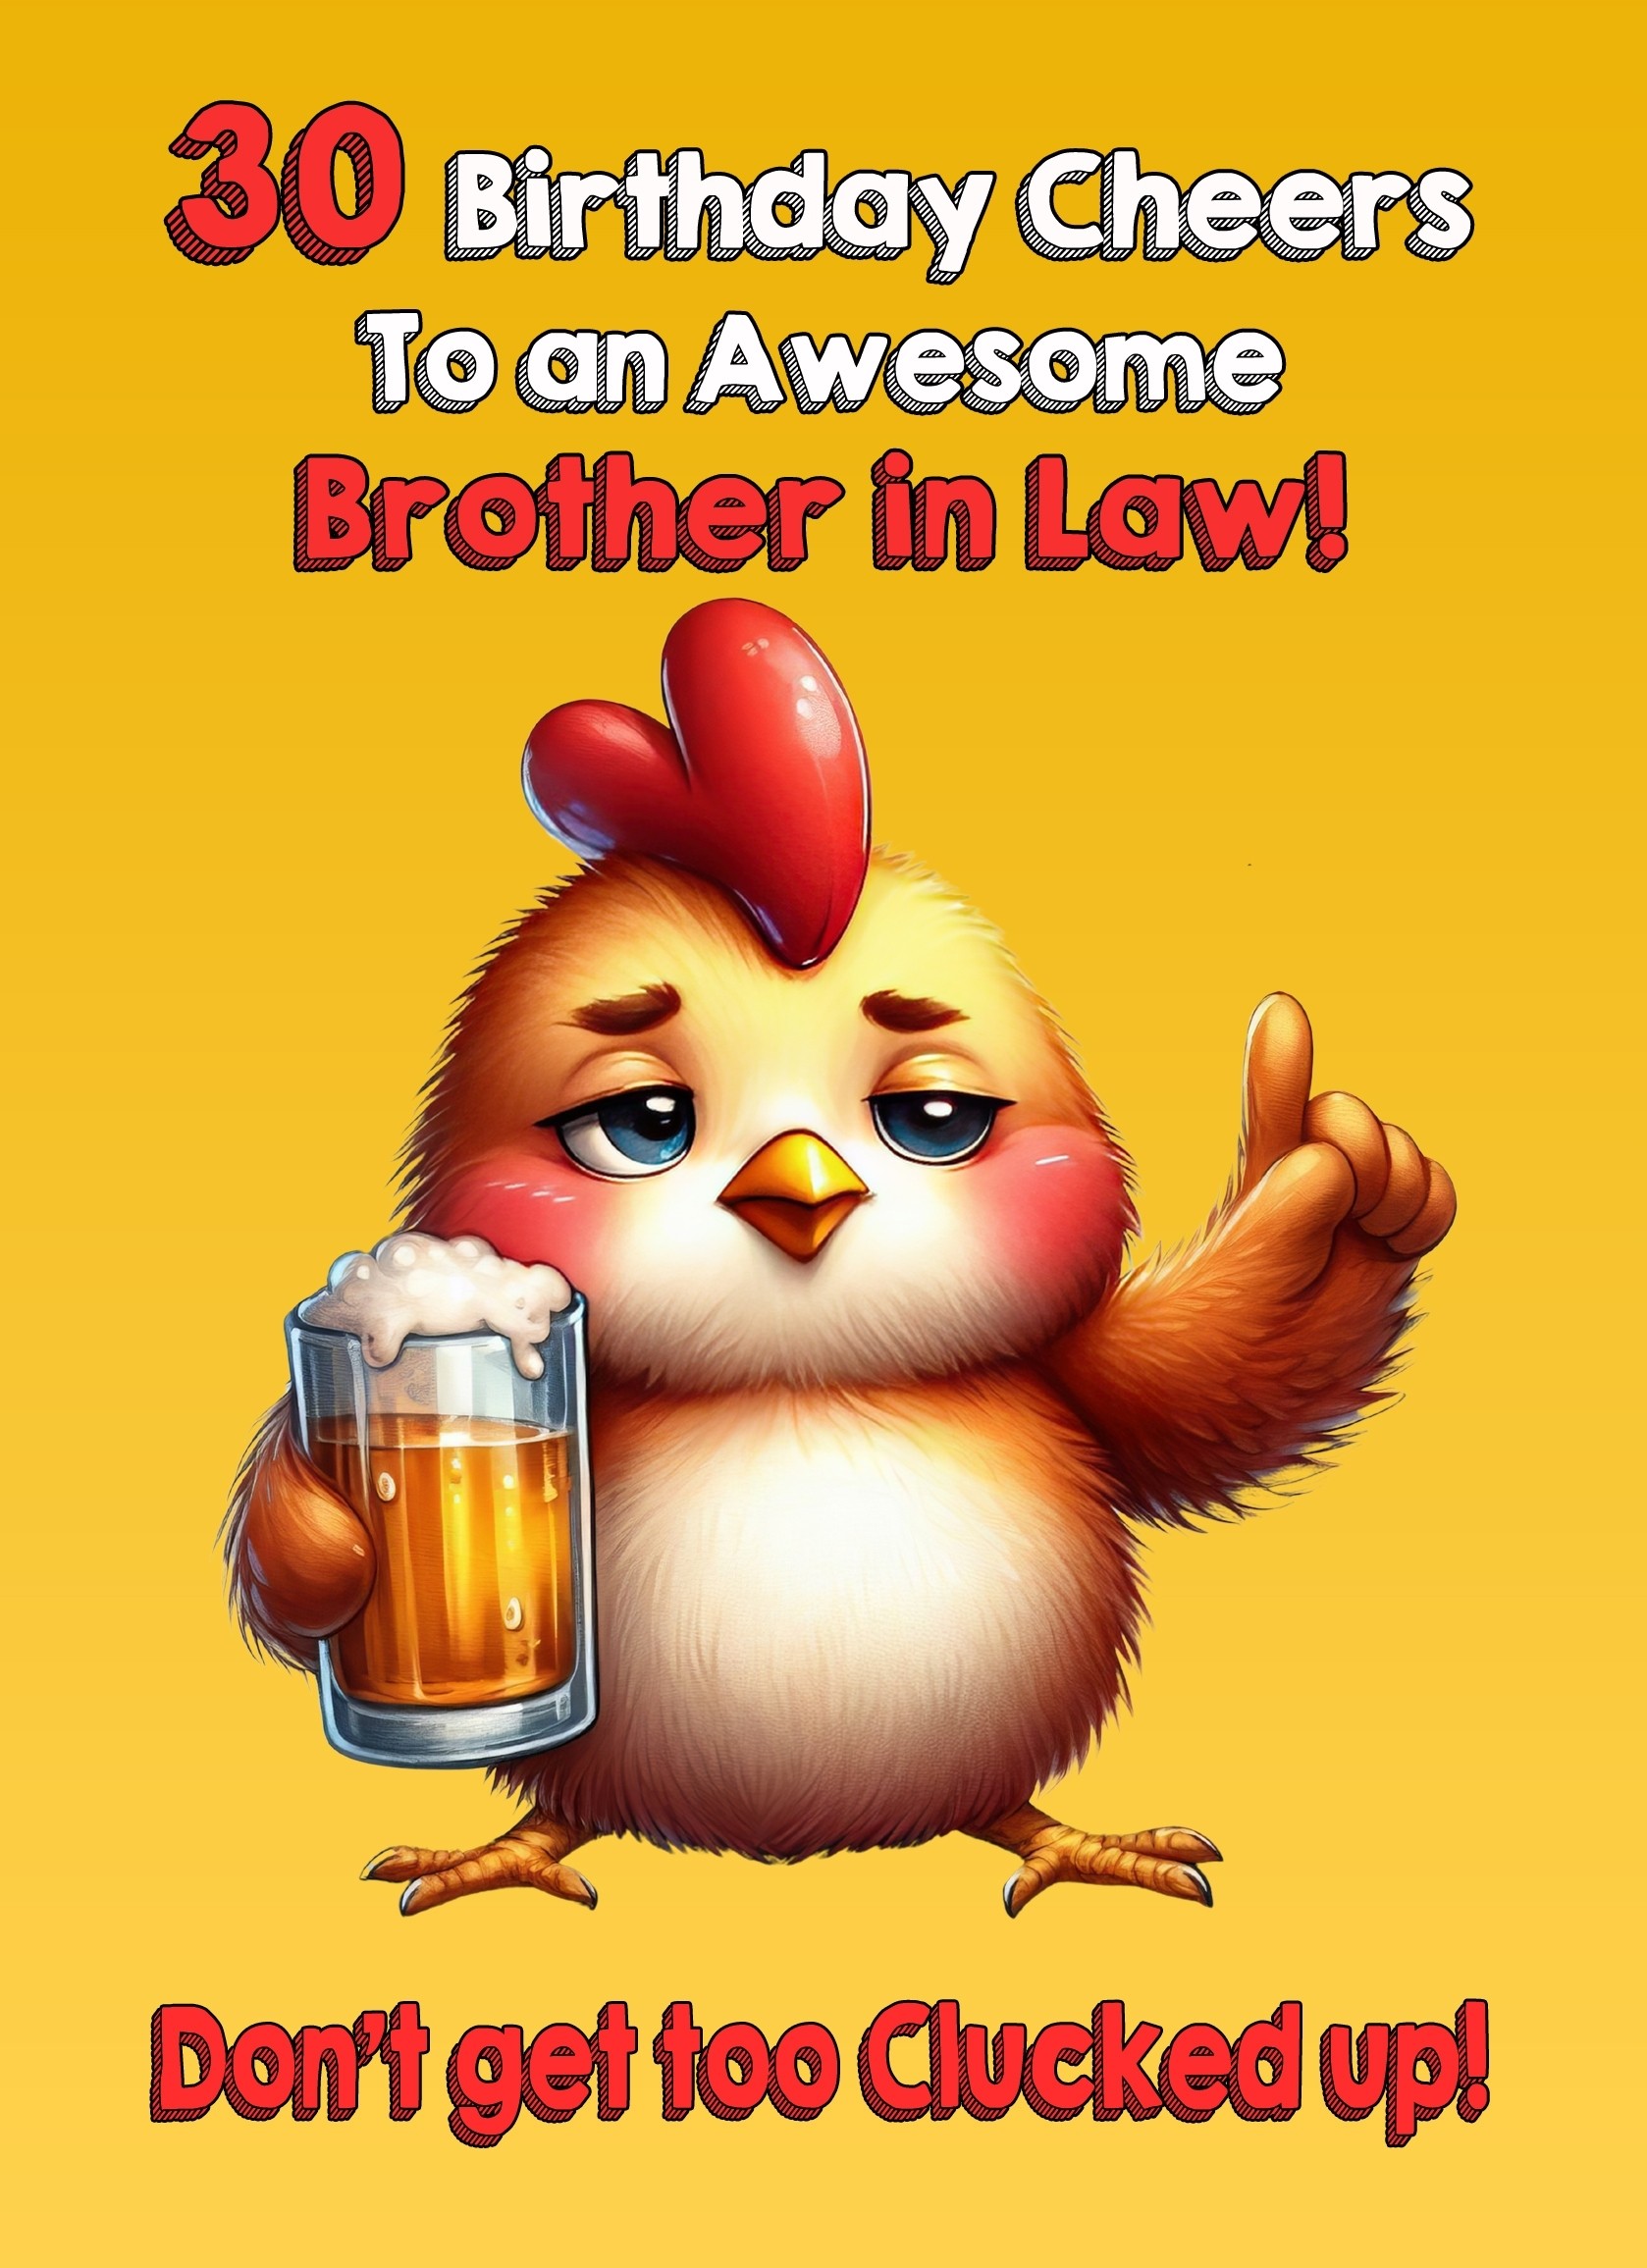 Brother in Law 30th Birthday Card (Funny Beer Chicken Humour)